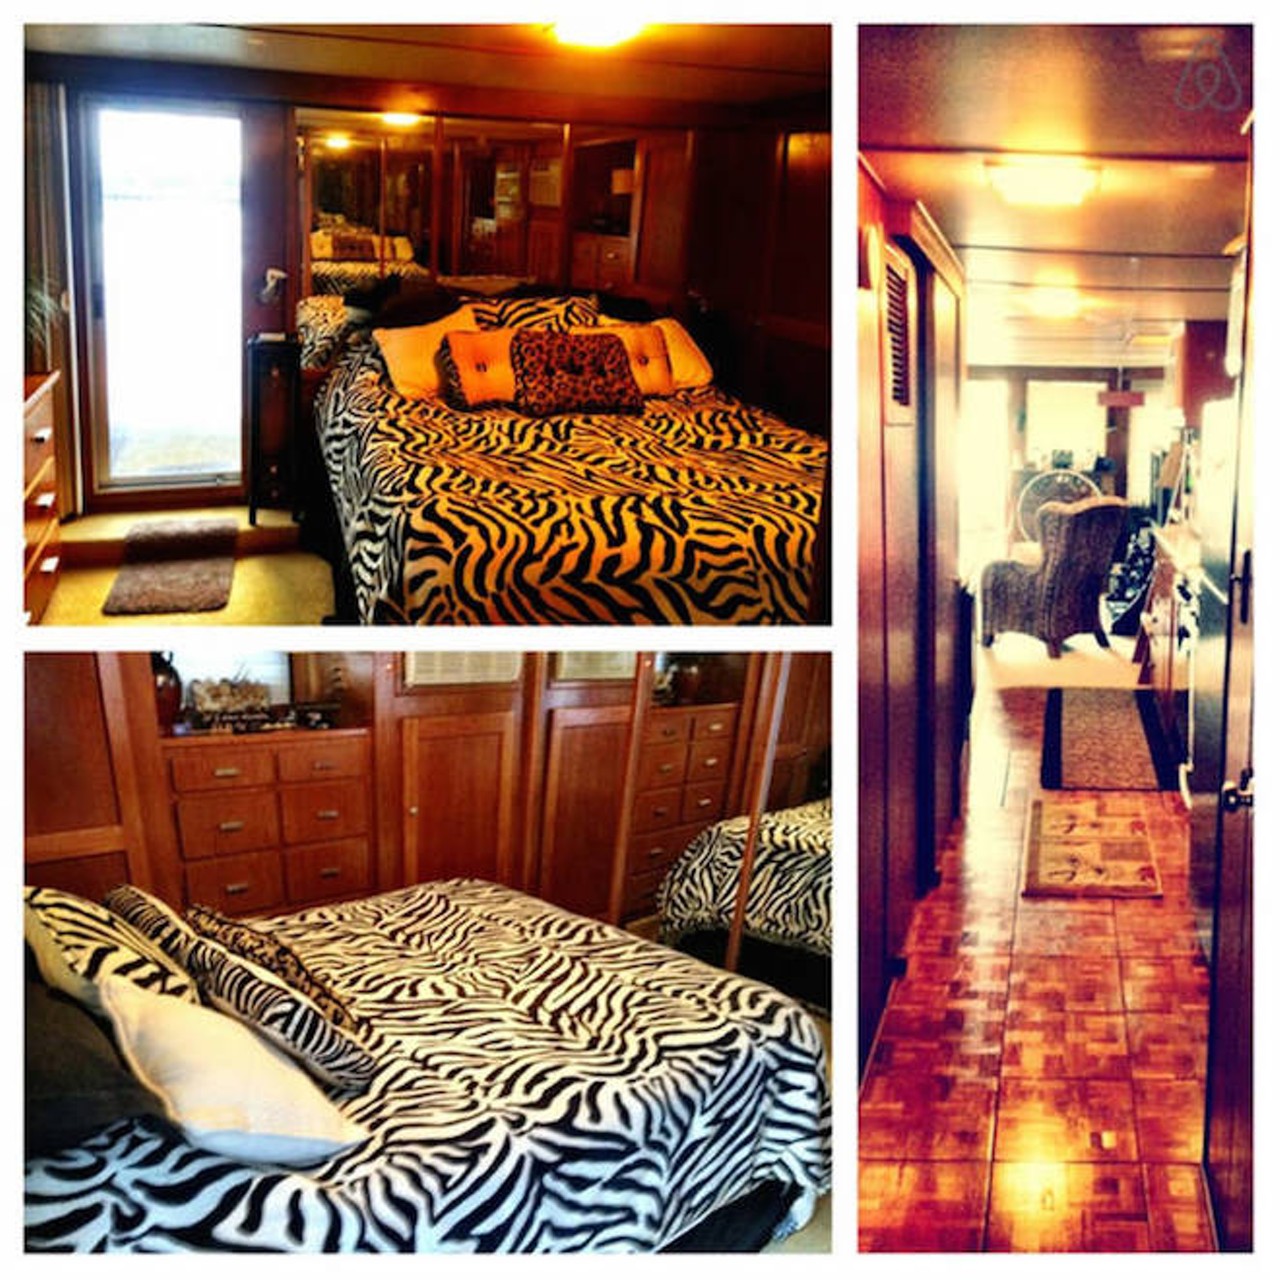 Rebecca will rent you her 62-foot-long luxury houseboat on Lake Monroe in Sanford for $175 per night.